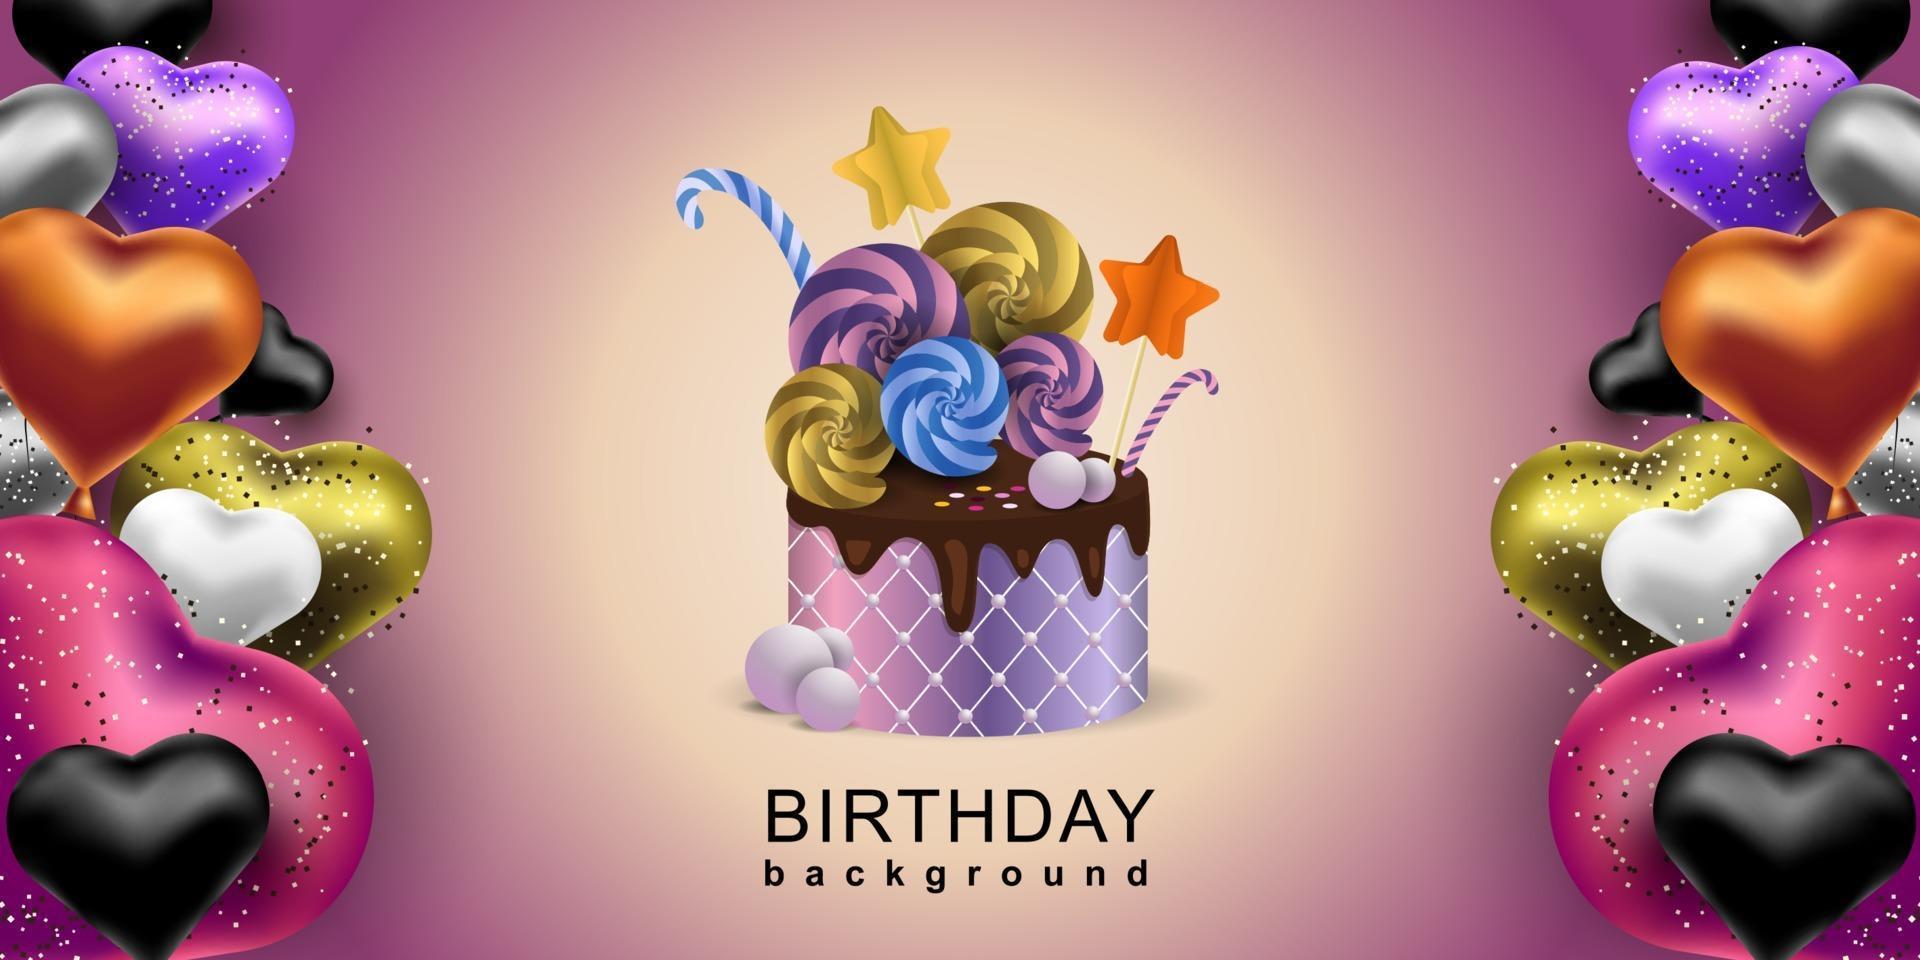 Happy Birthday Background. Colorful balloons heart shape and chocolate cake Vector invitation banner.